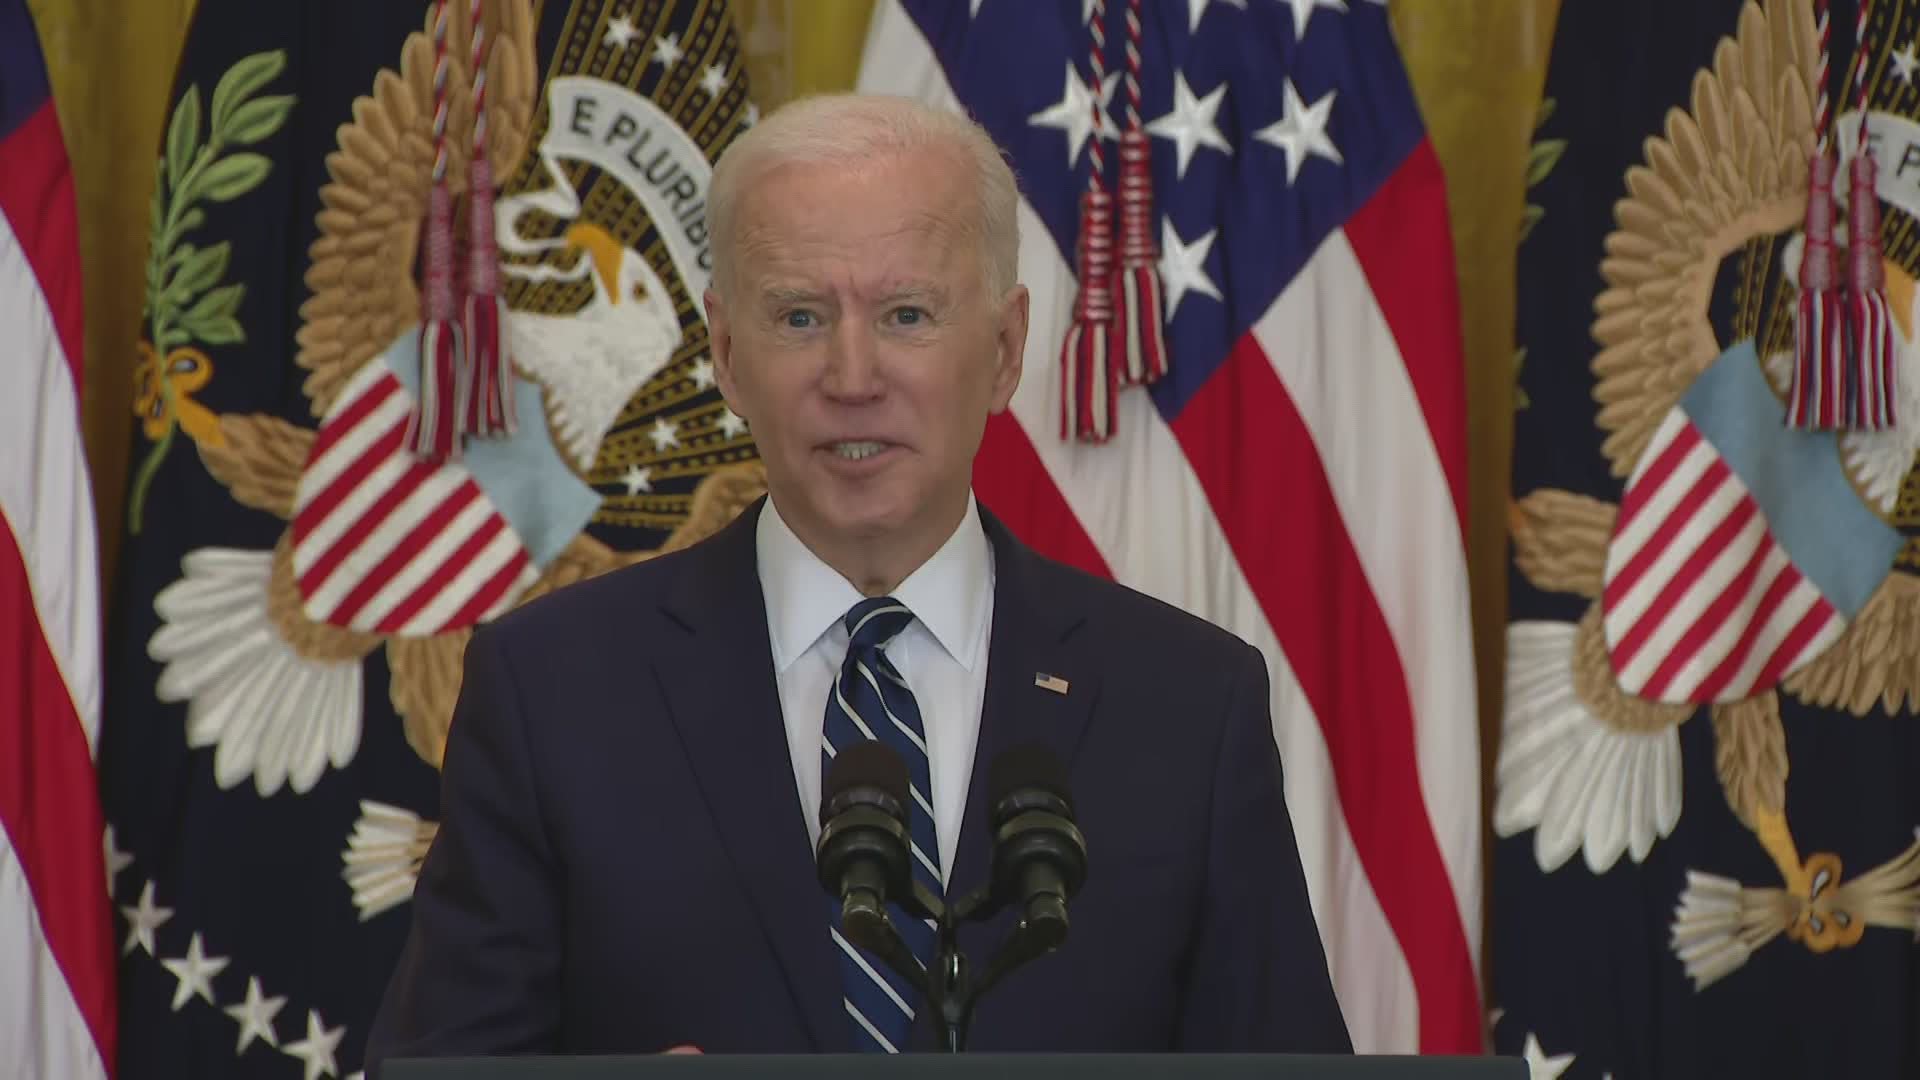 "Republican voters I know call this despicable," President Joe Biden said.